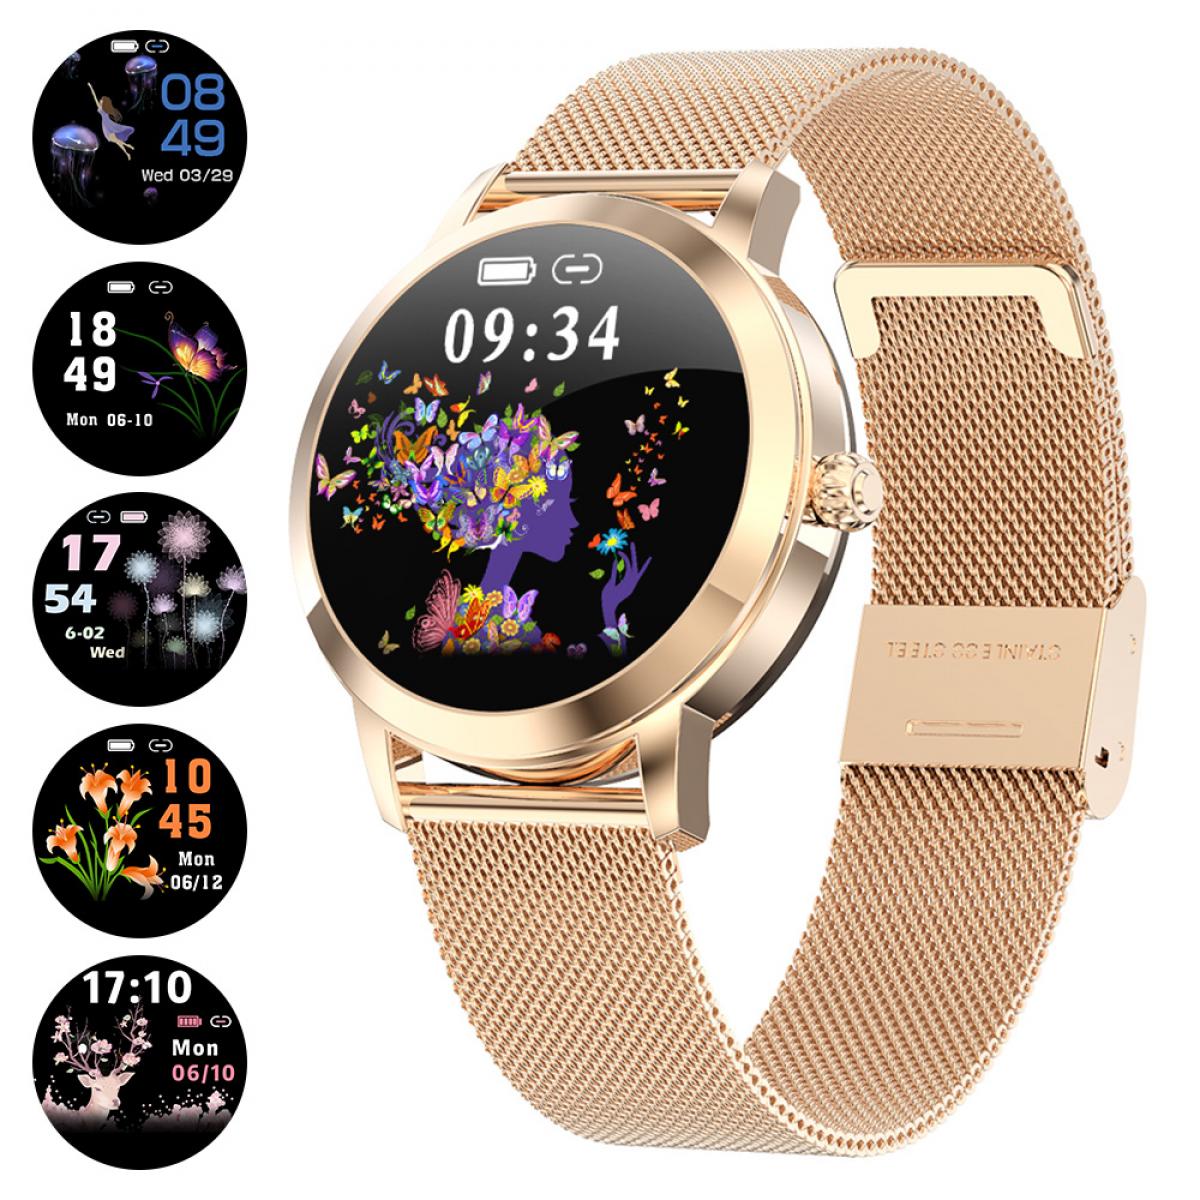 Waterproof Fitness Smart Watches Women Lady Heart Rate Tracker iOS Android Gift 